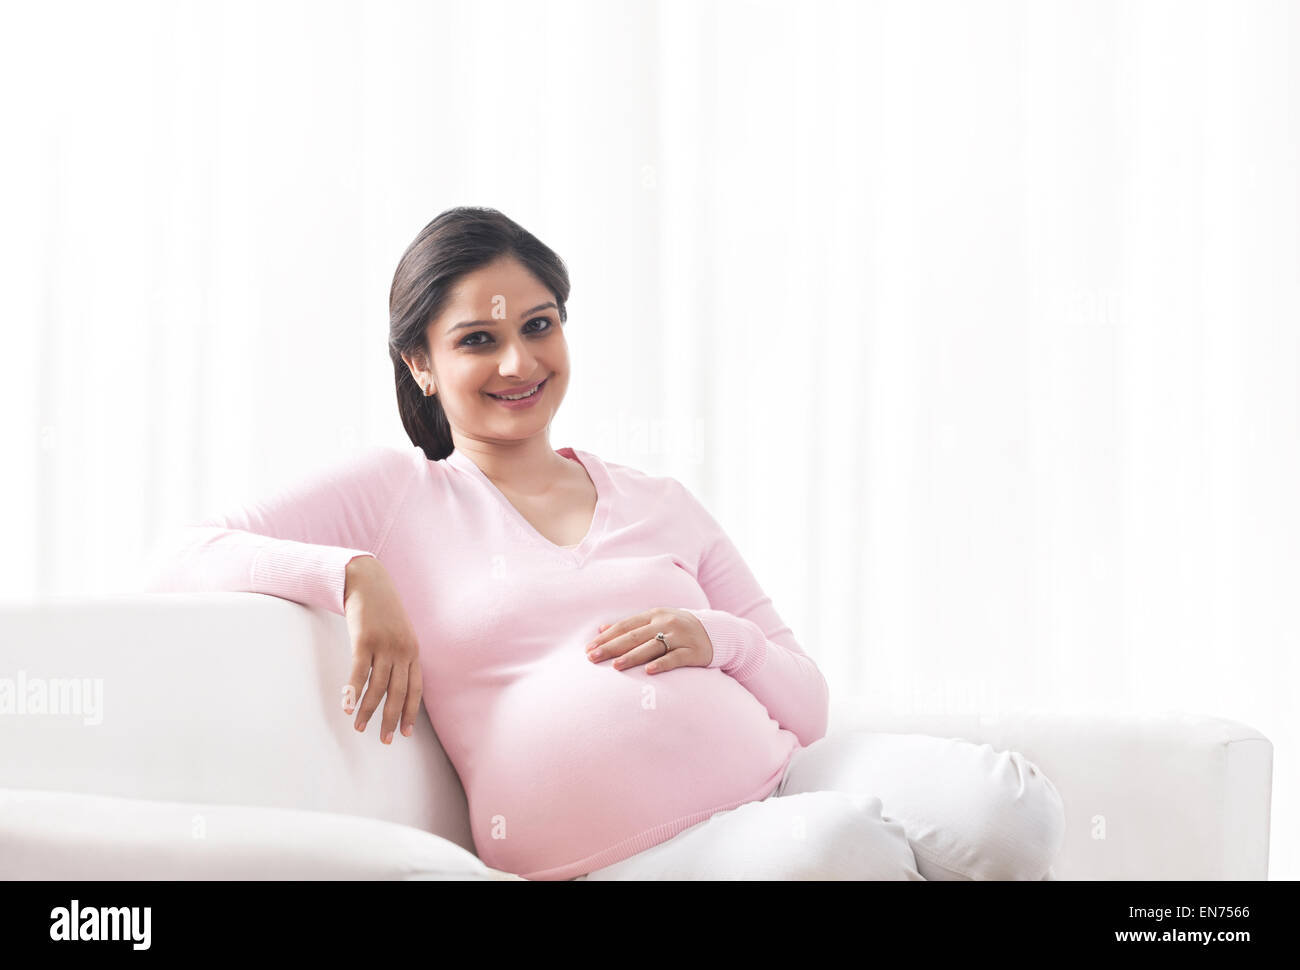 Portrait of a pregnant woman sitting on a couch Stock Photo